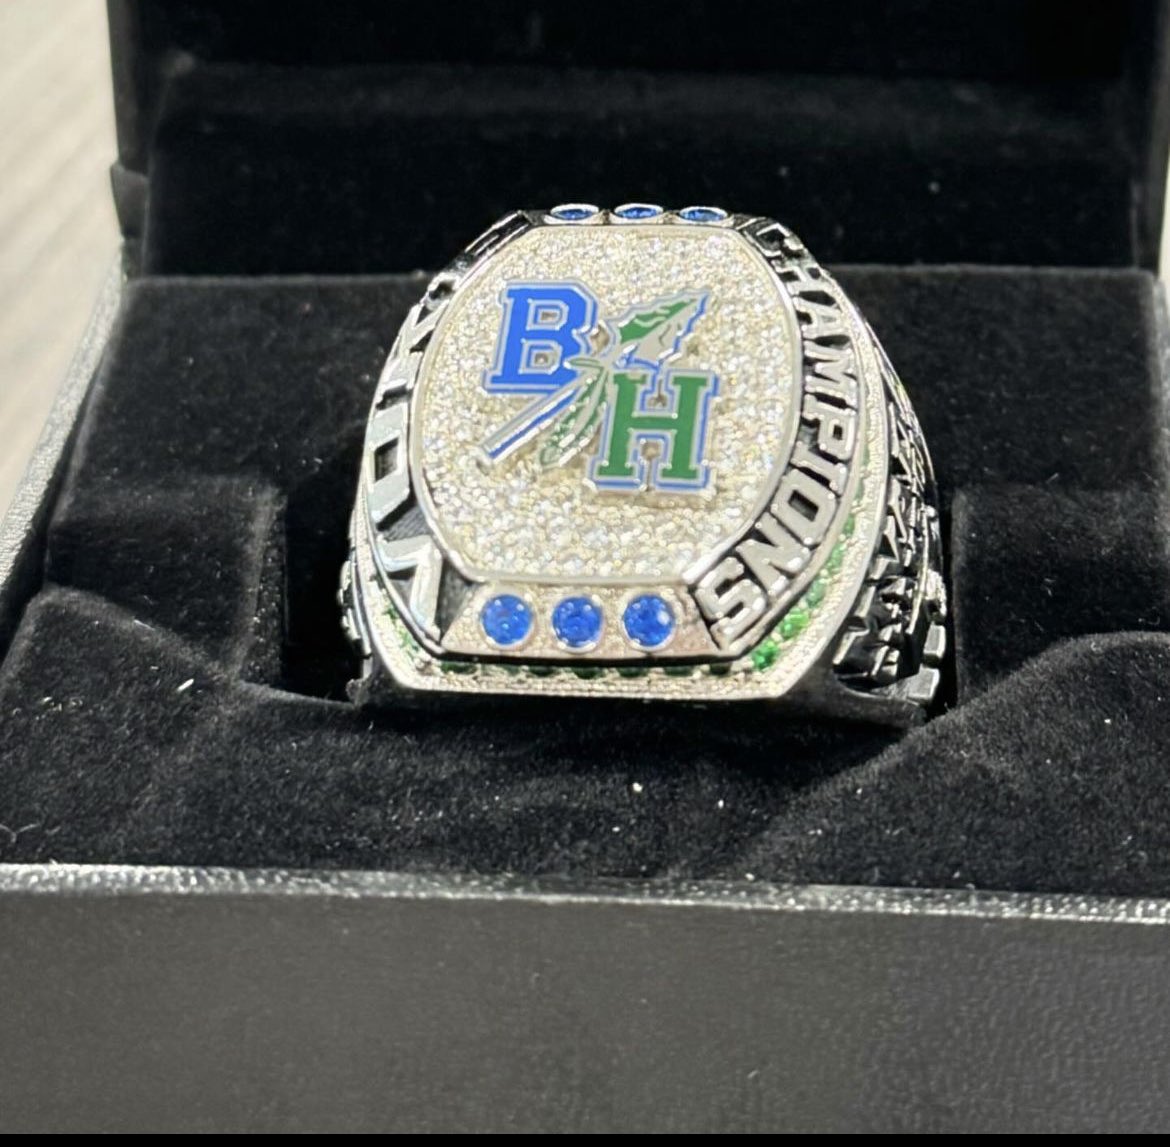 It was a special week at Blue Hills, our Voke Championship Rings came in. Thank you to Ken @awardguys for putting it all together. It’s almost time to start climbing the Mountain again. As always for us, The Voke Title is everything. #runthedamnball @MVADA4